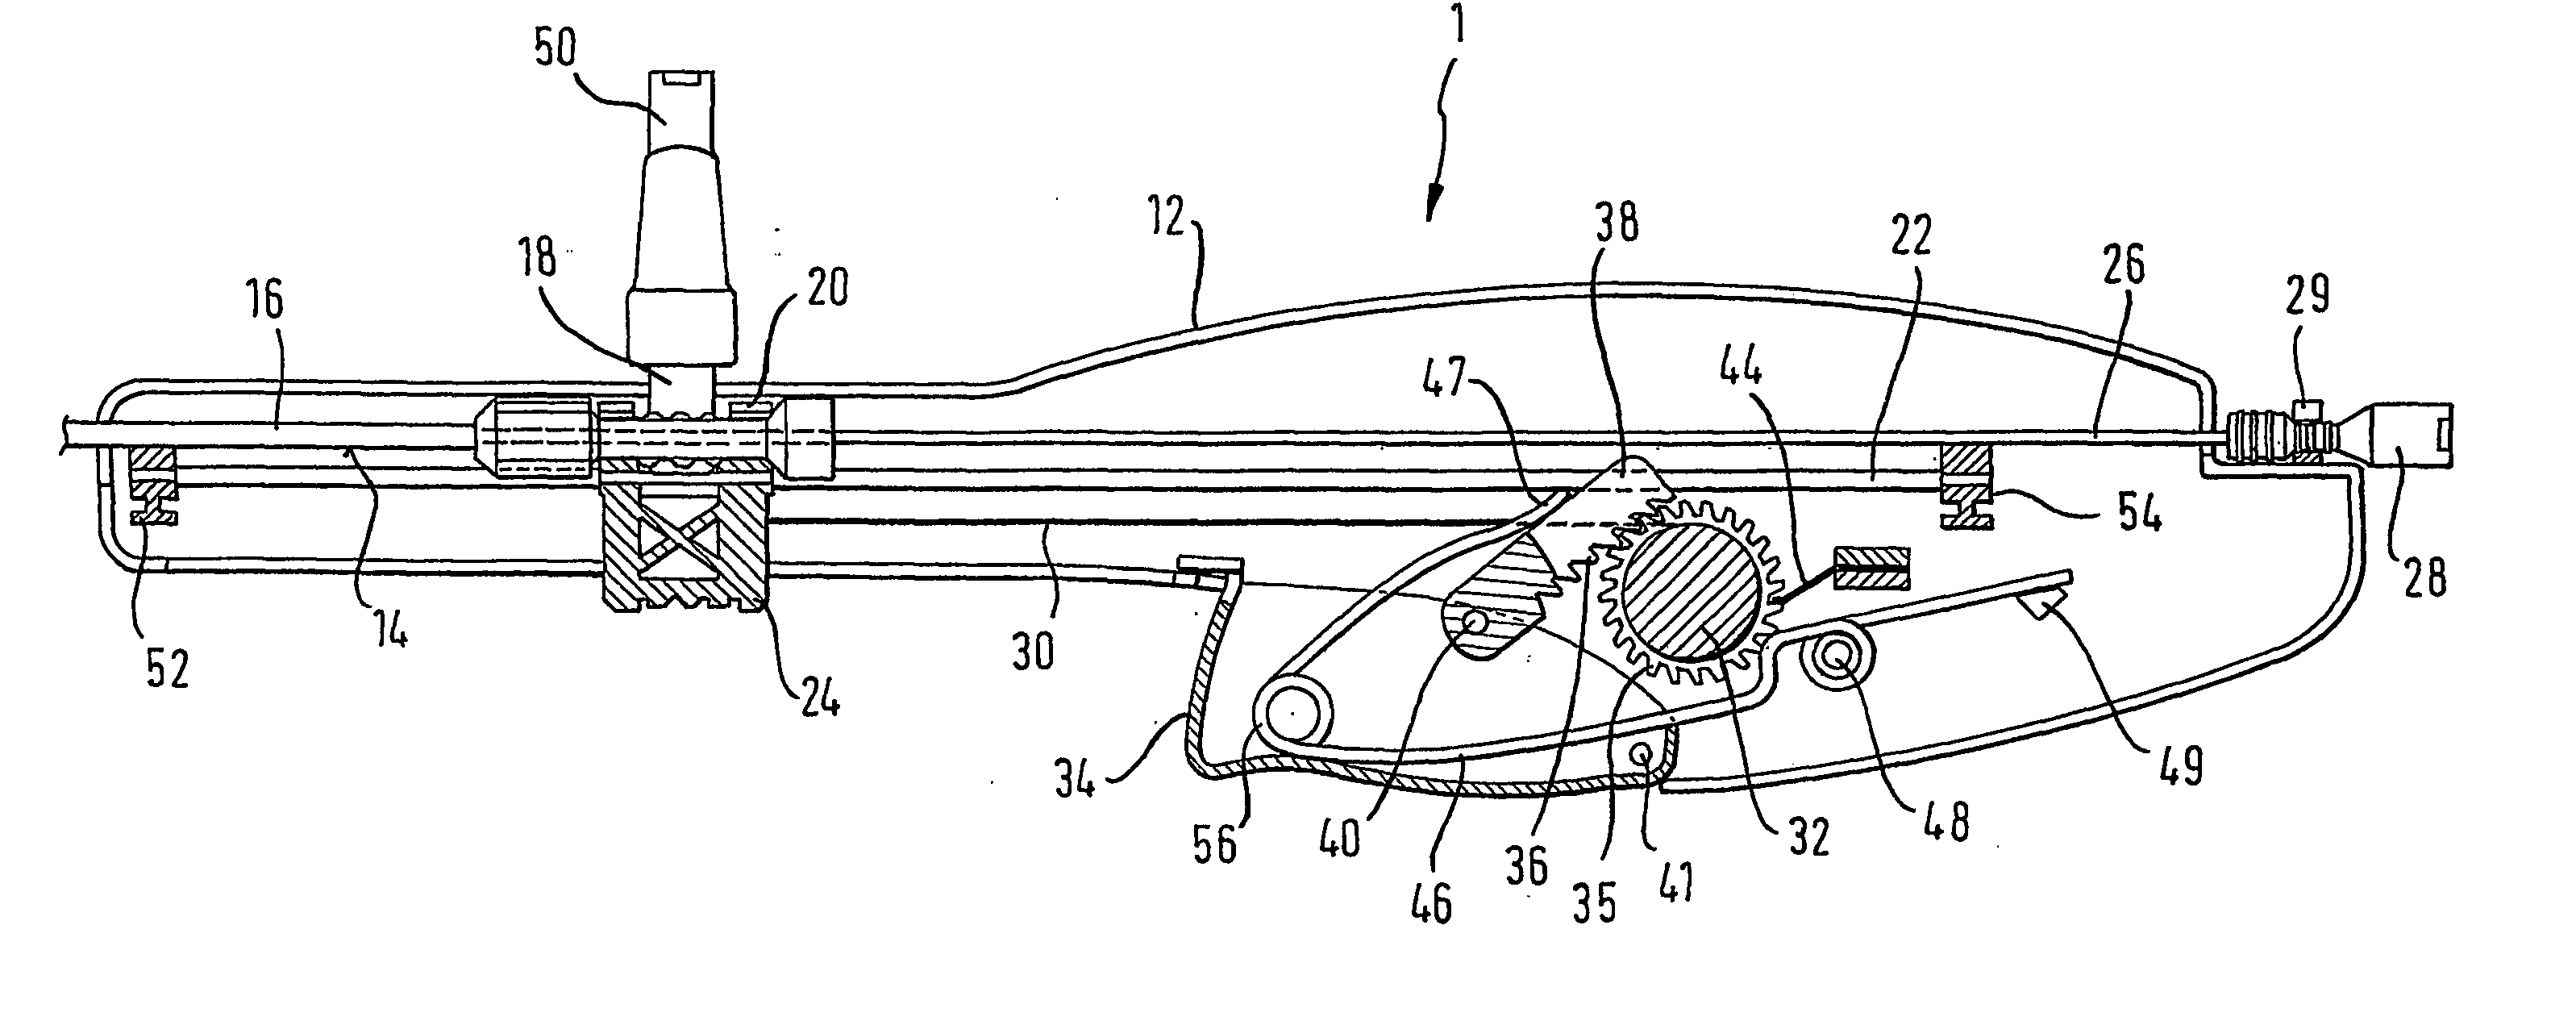 Self-expanding stent delivery device